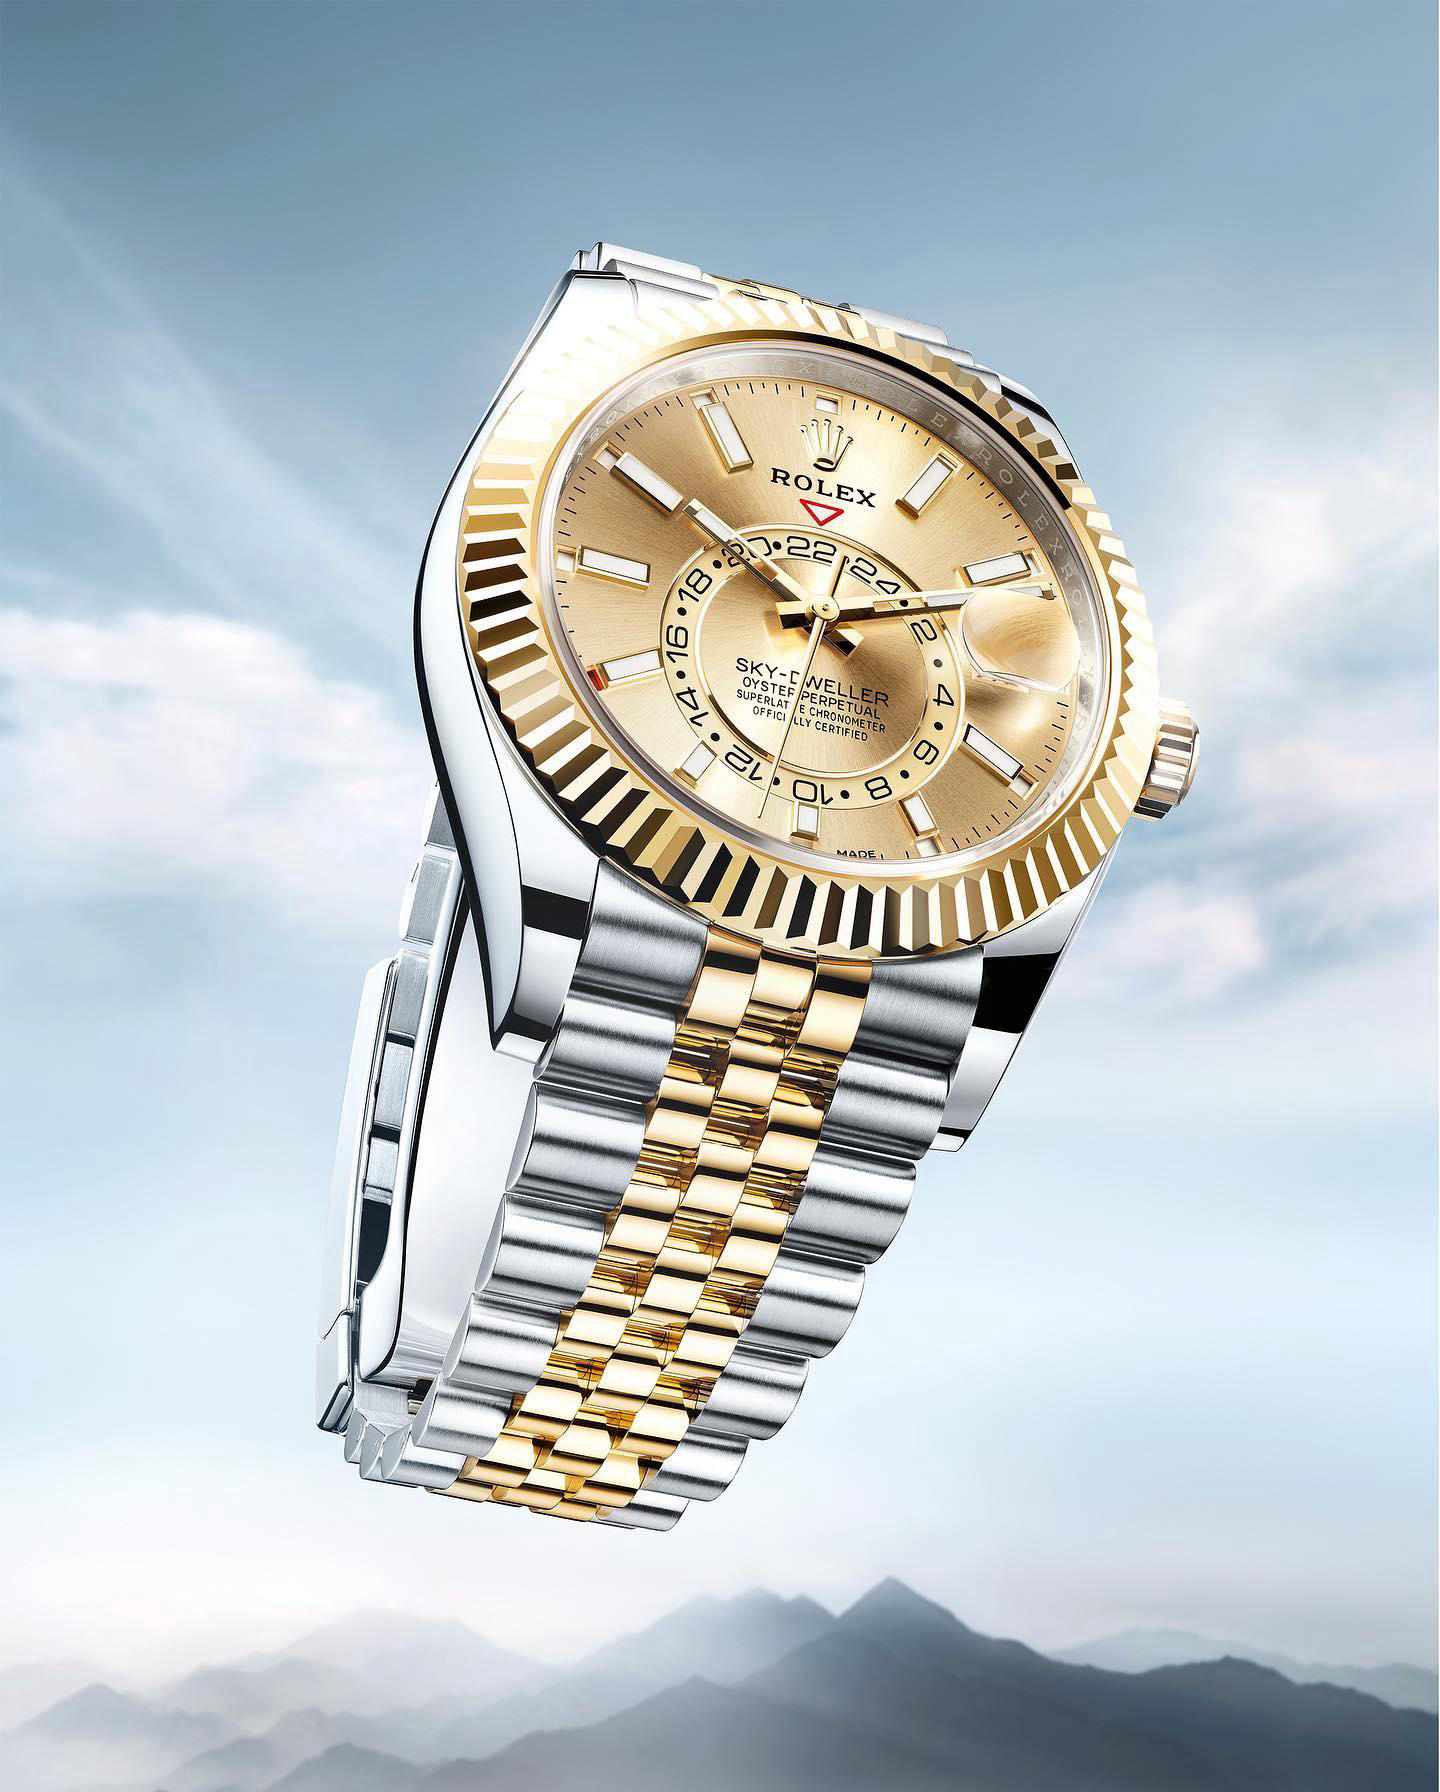 image  1 ROLEX - For all world travellers